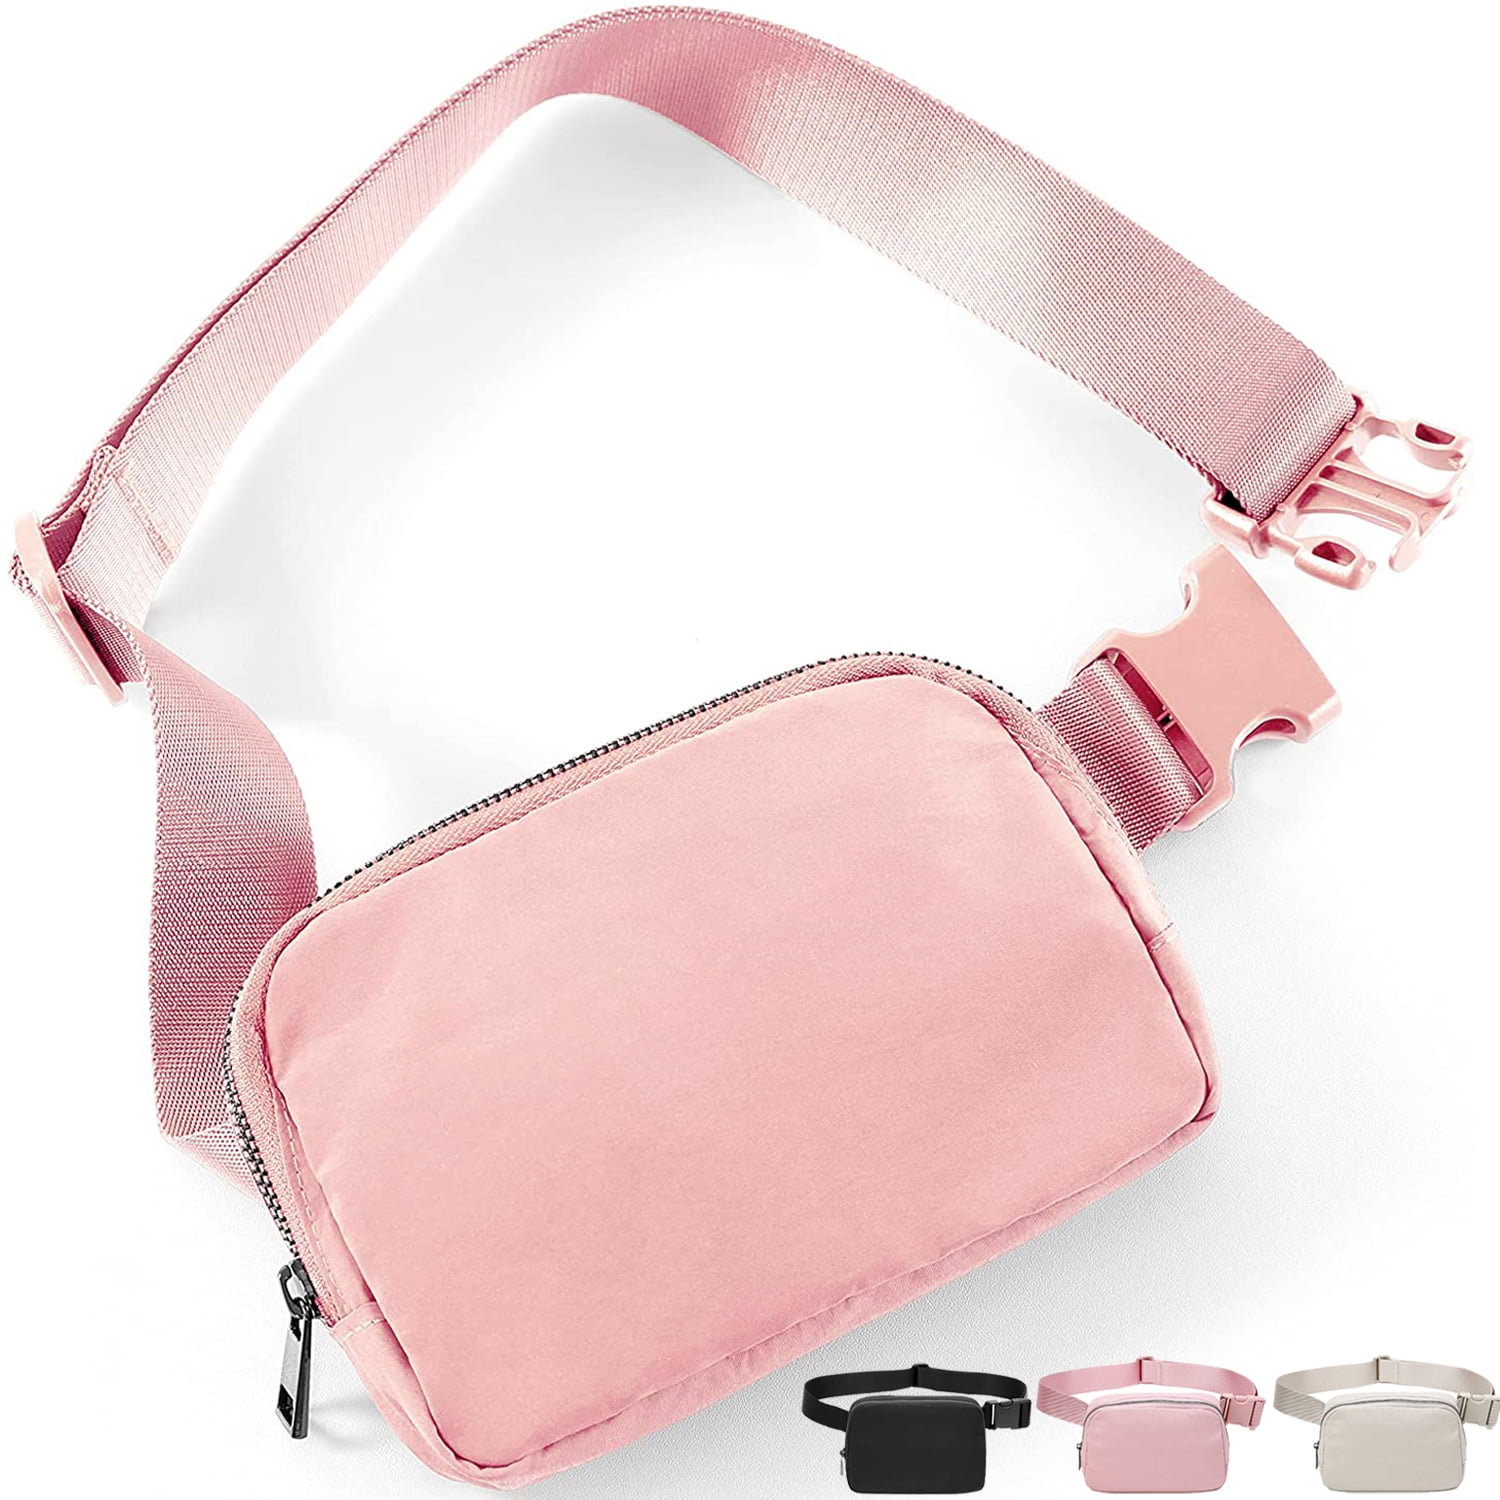 Fanny Packs for Women Men, Pink Crossbody Fanny Pack, Unisex Mini Belt Bag  with Adjustable Strap, Fashion Cross Body Waist Pack for Traveling Casual